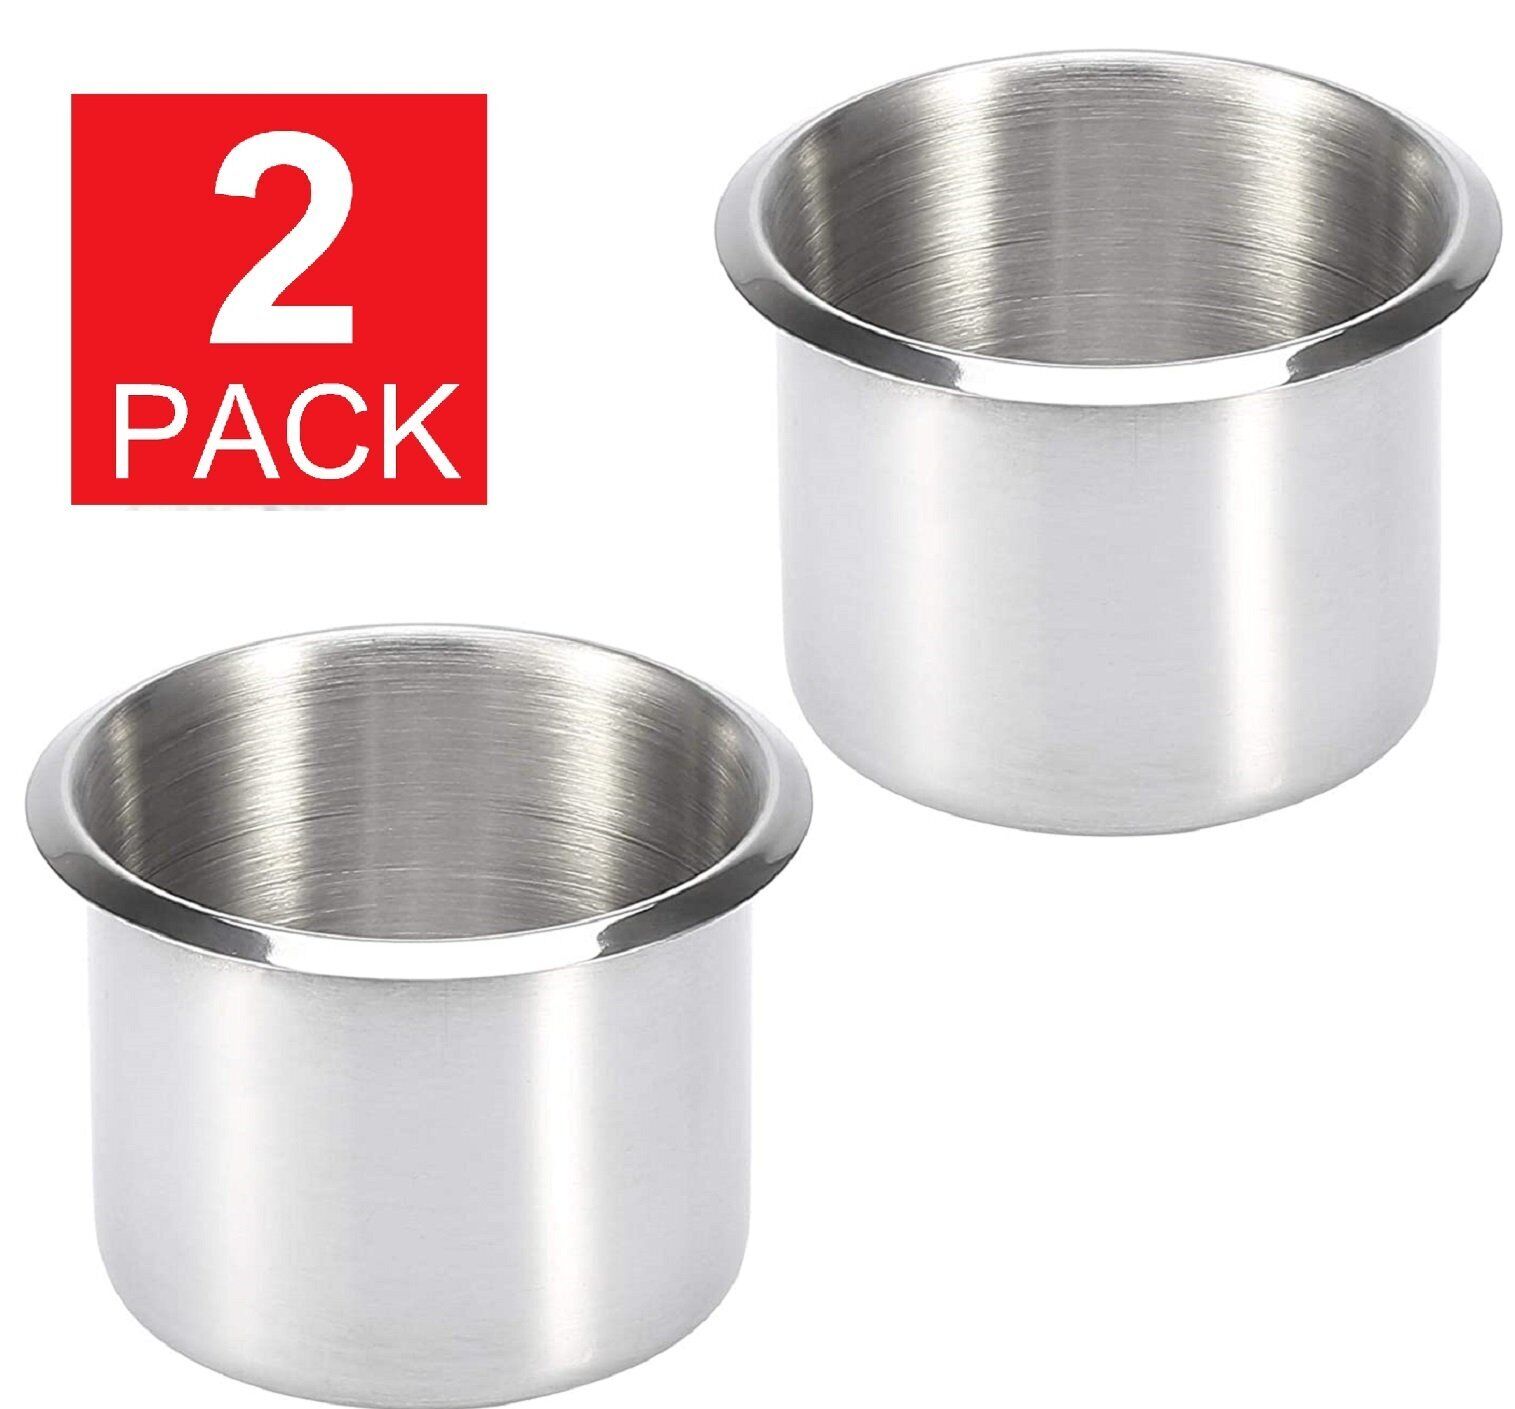 Universal Stainless Steel Cup Drink Holders for Car Boat Truck Marine Camper RV